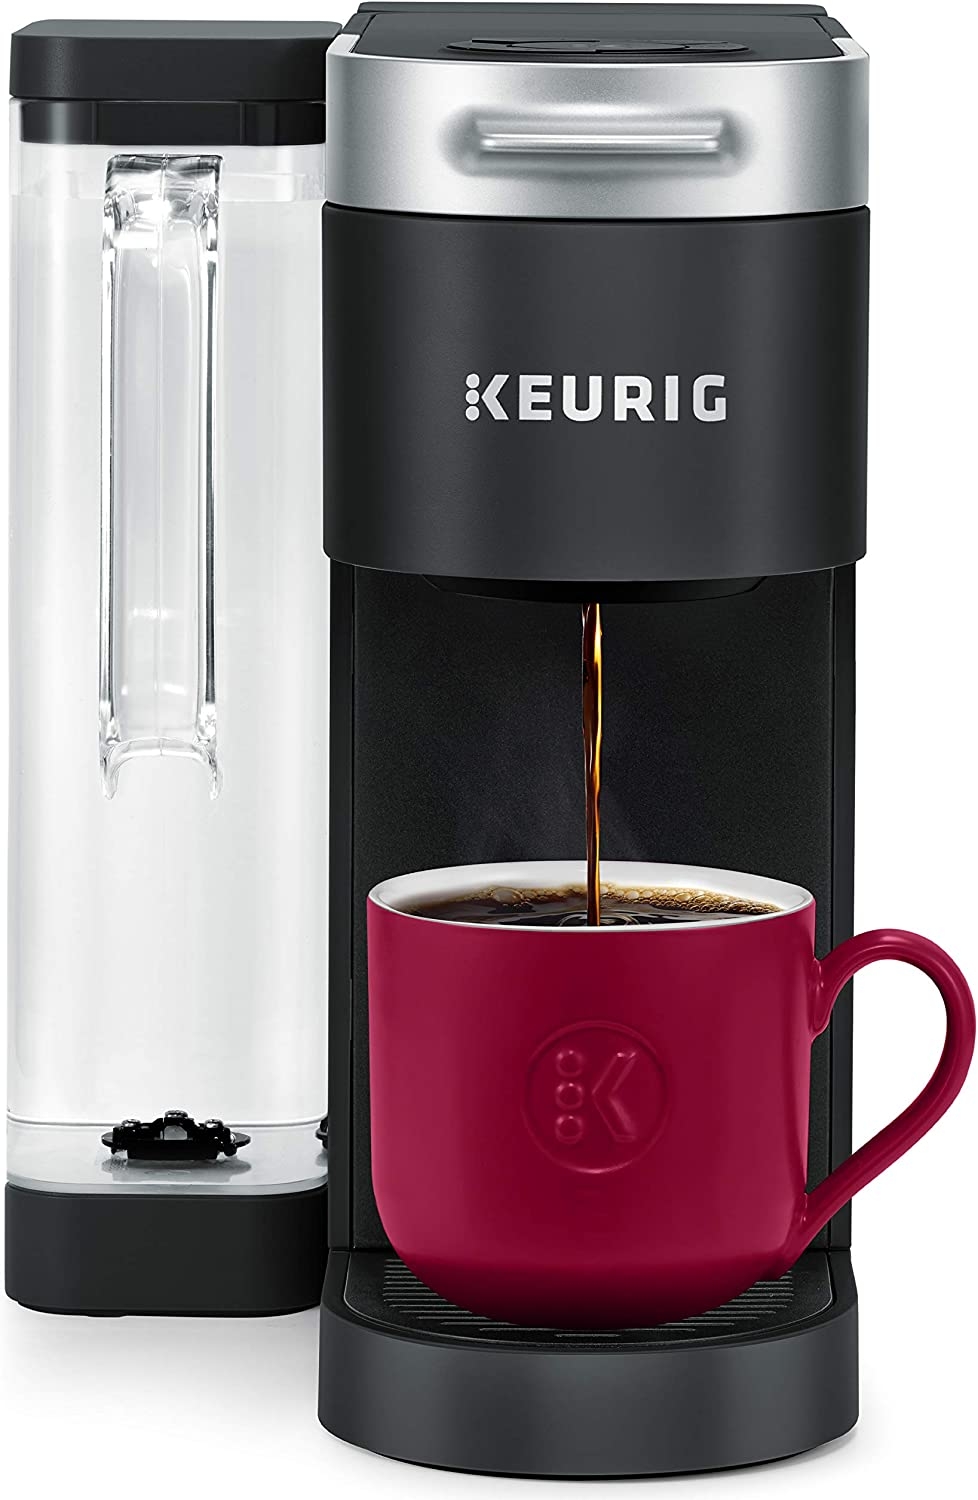 Keurig K-Supreme Coffee Maker, Single Serve K-Cup Pod Coffee Brewer, With MultiStream Technology, 66 Oz Dual-Position Reservoir,